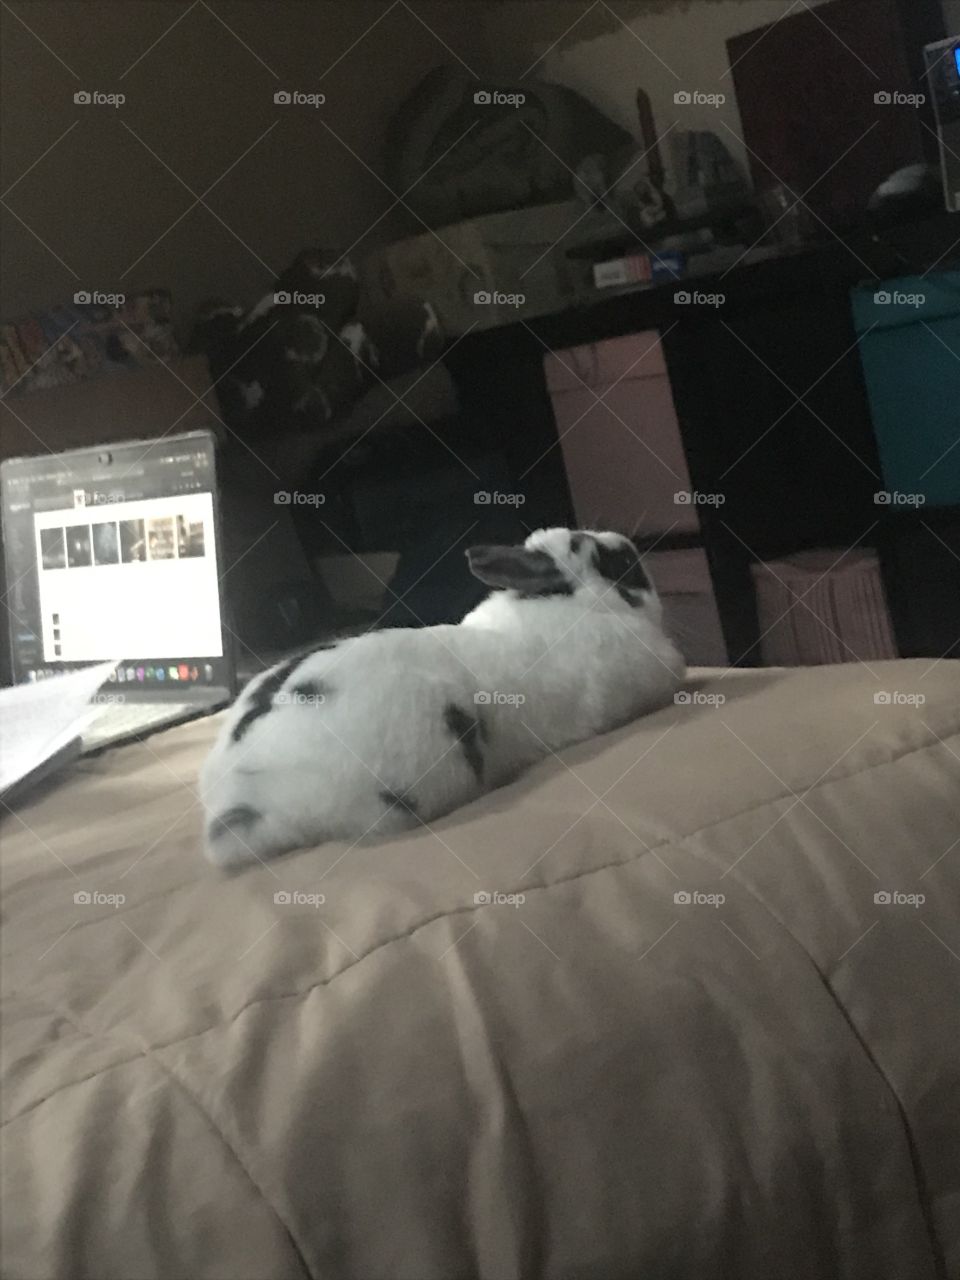 Super cute photo of a long bunny laying down and relaxing on a bed in a home 